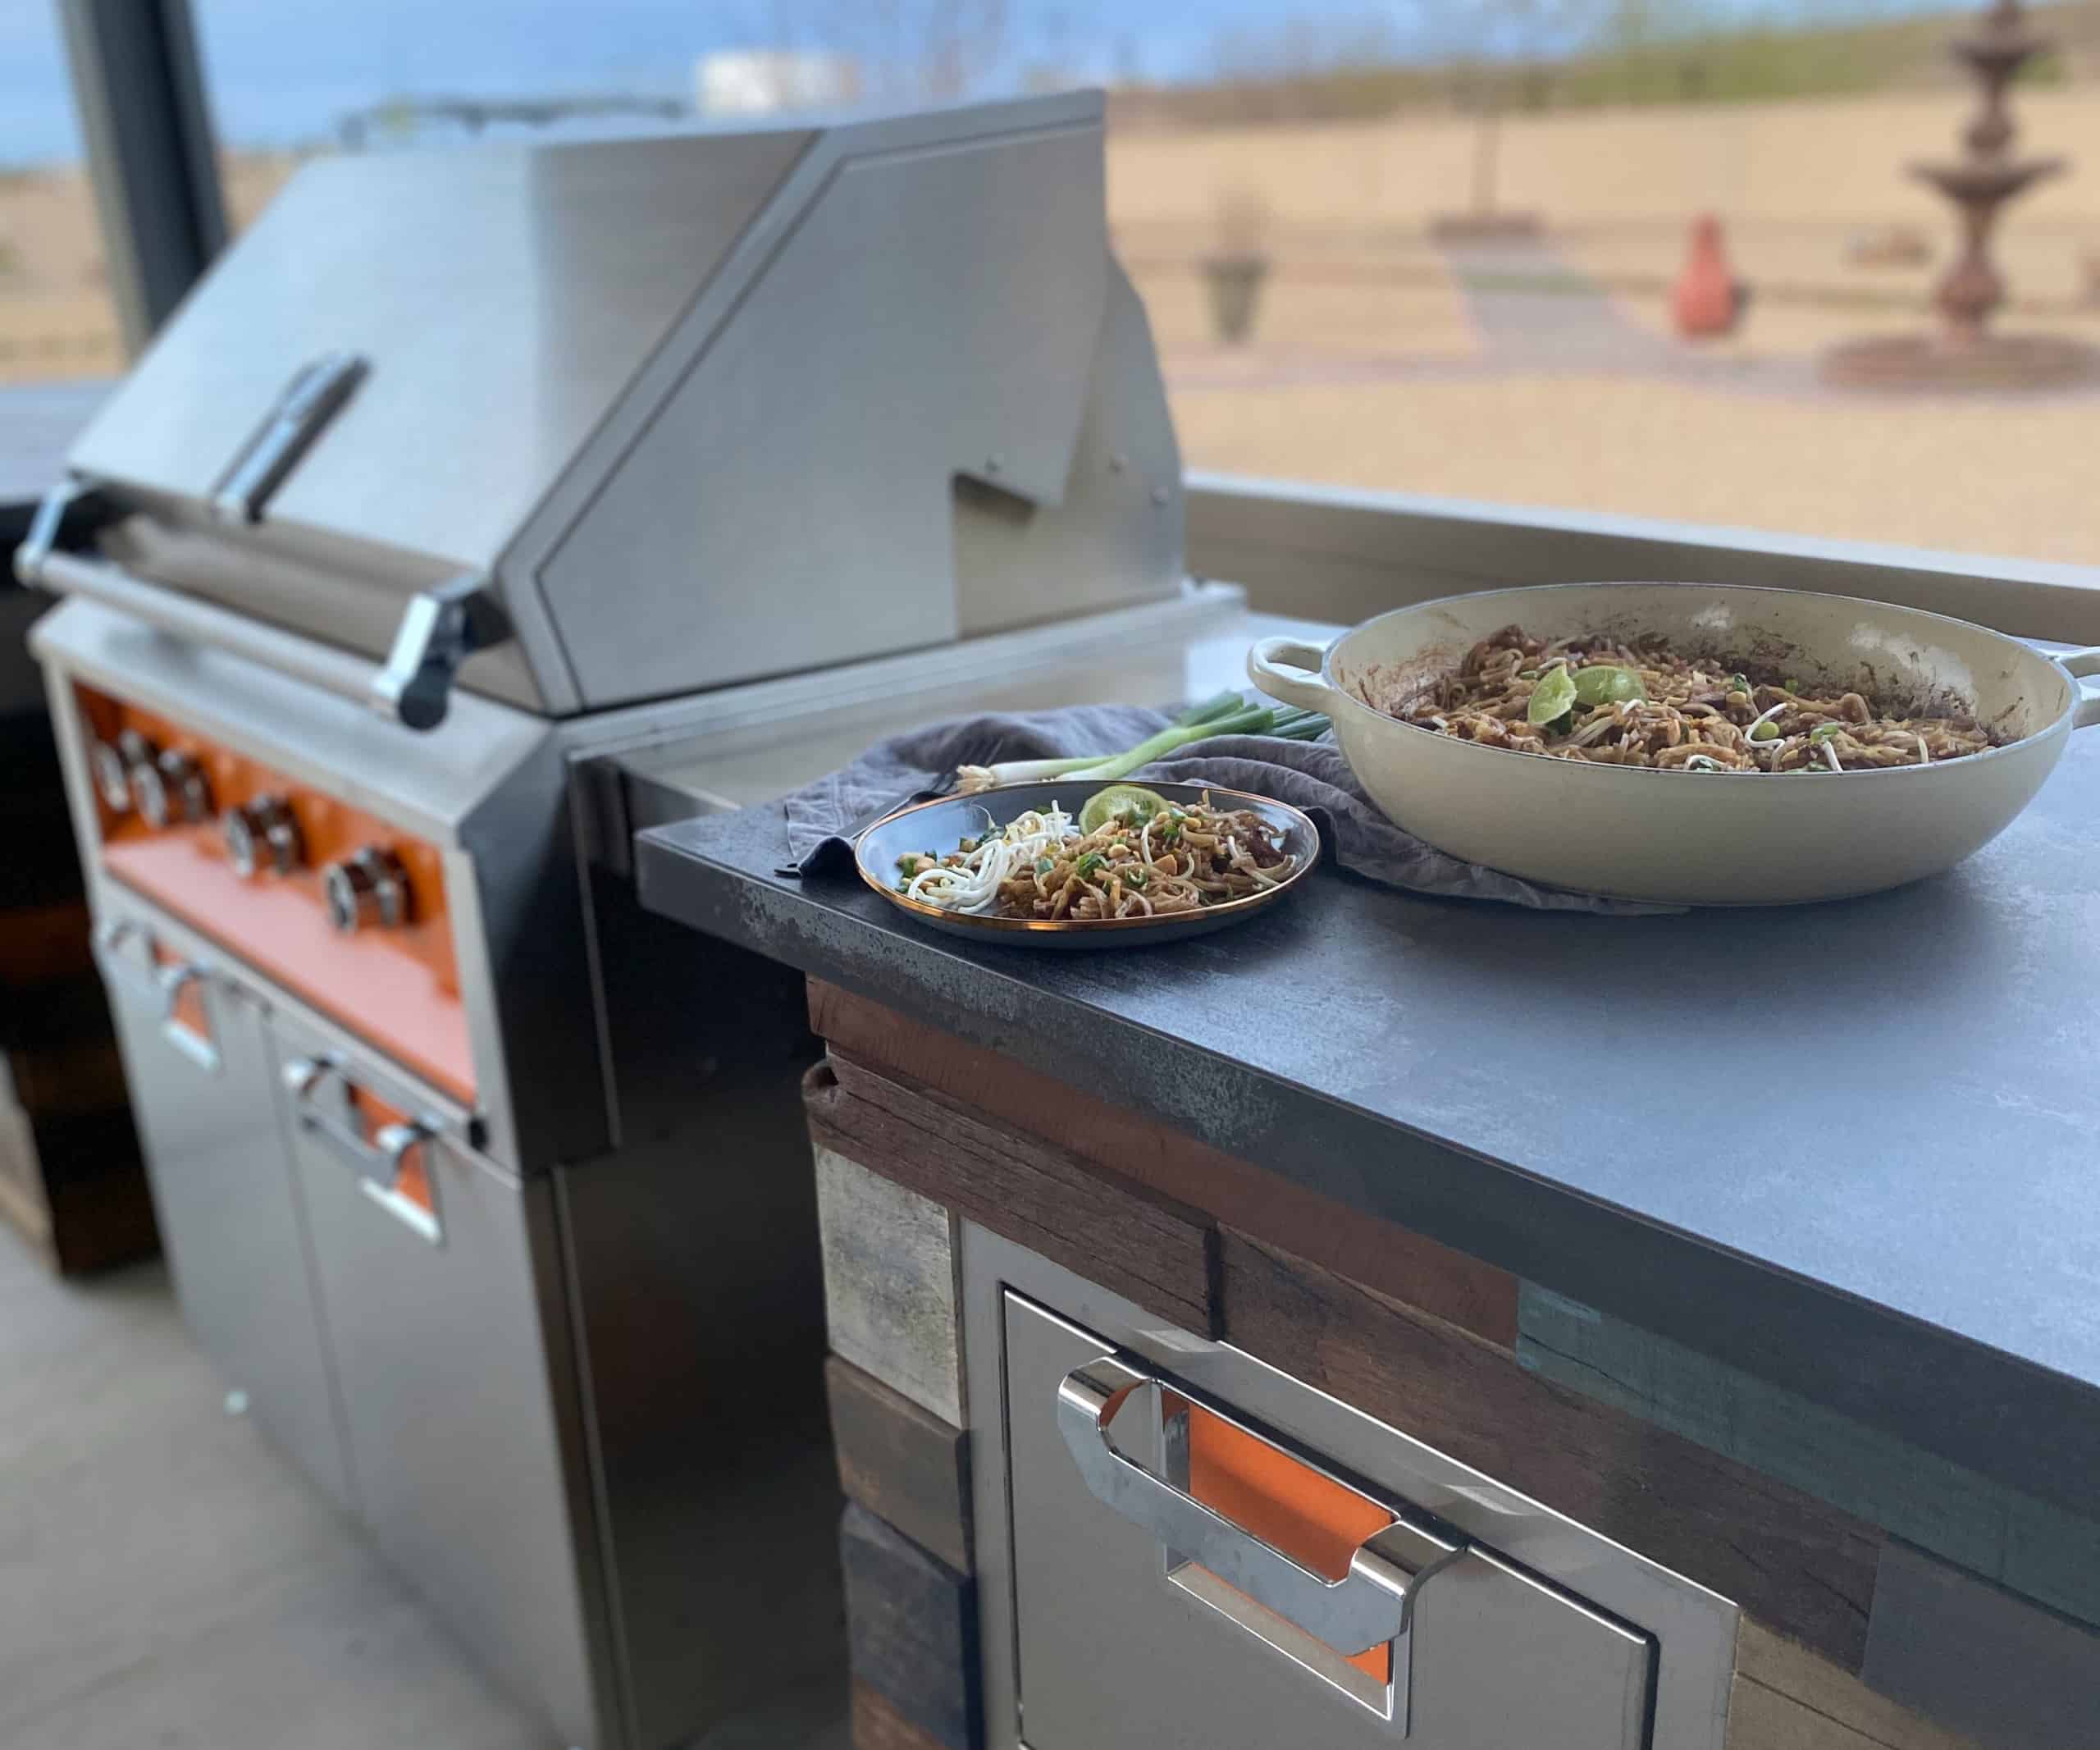 Grilled Pad Thai next to a grill on counter.